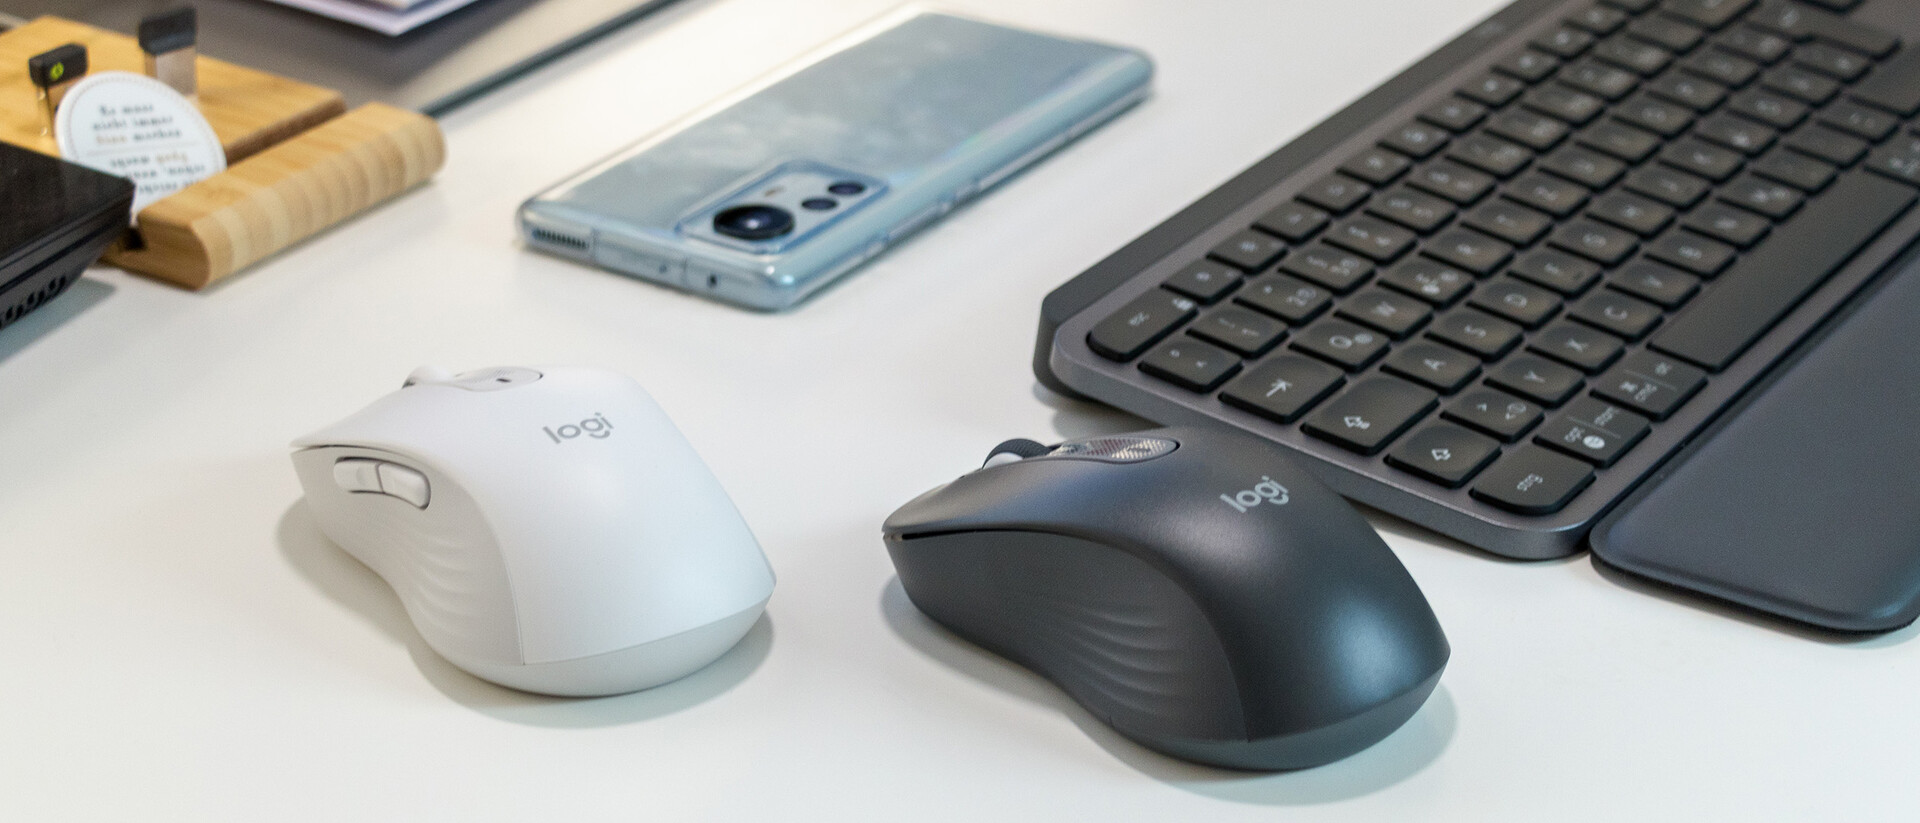 Logitech Signature M650 review - Wireless mouse with Bolt